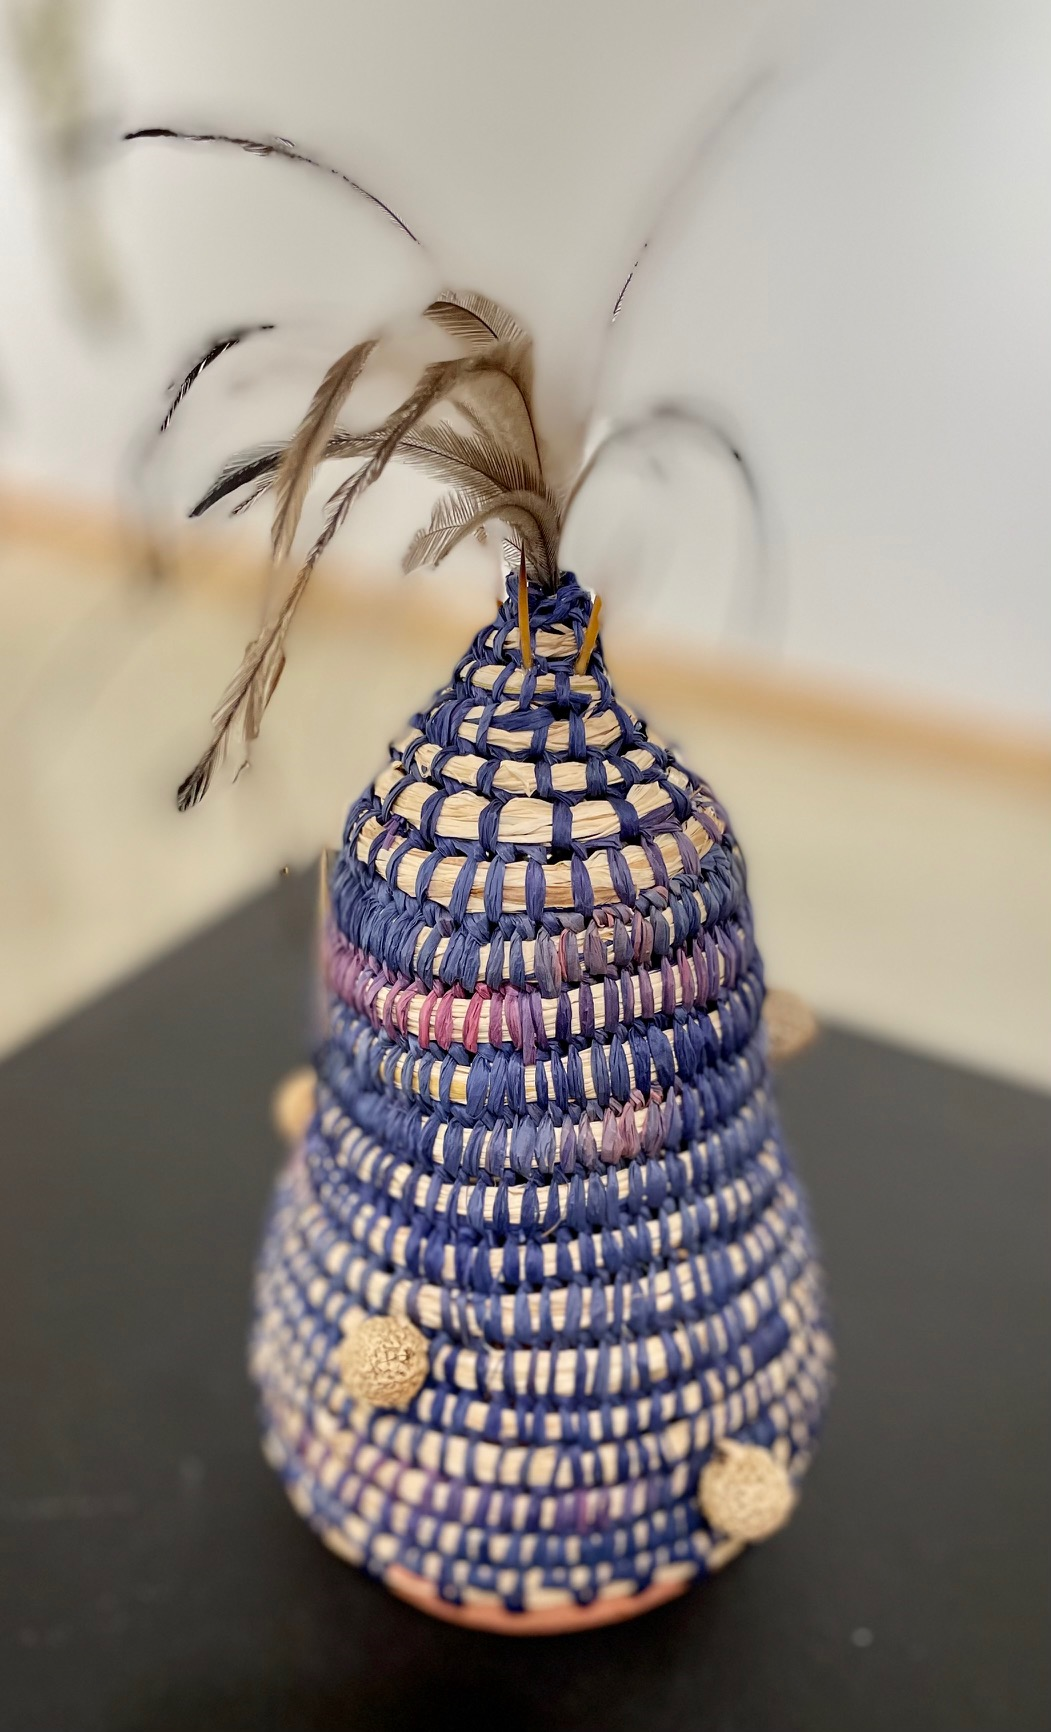 Woven Vase with Emu Feathers, Echidna Quills and Quandong - Trish Cerminara (Gamilaroi)